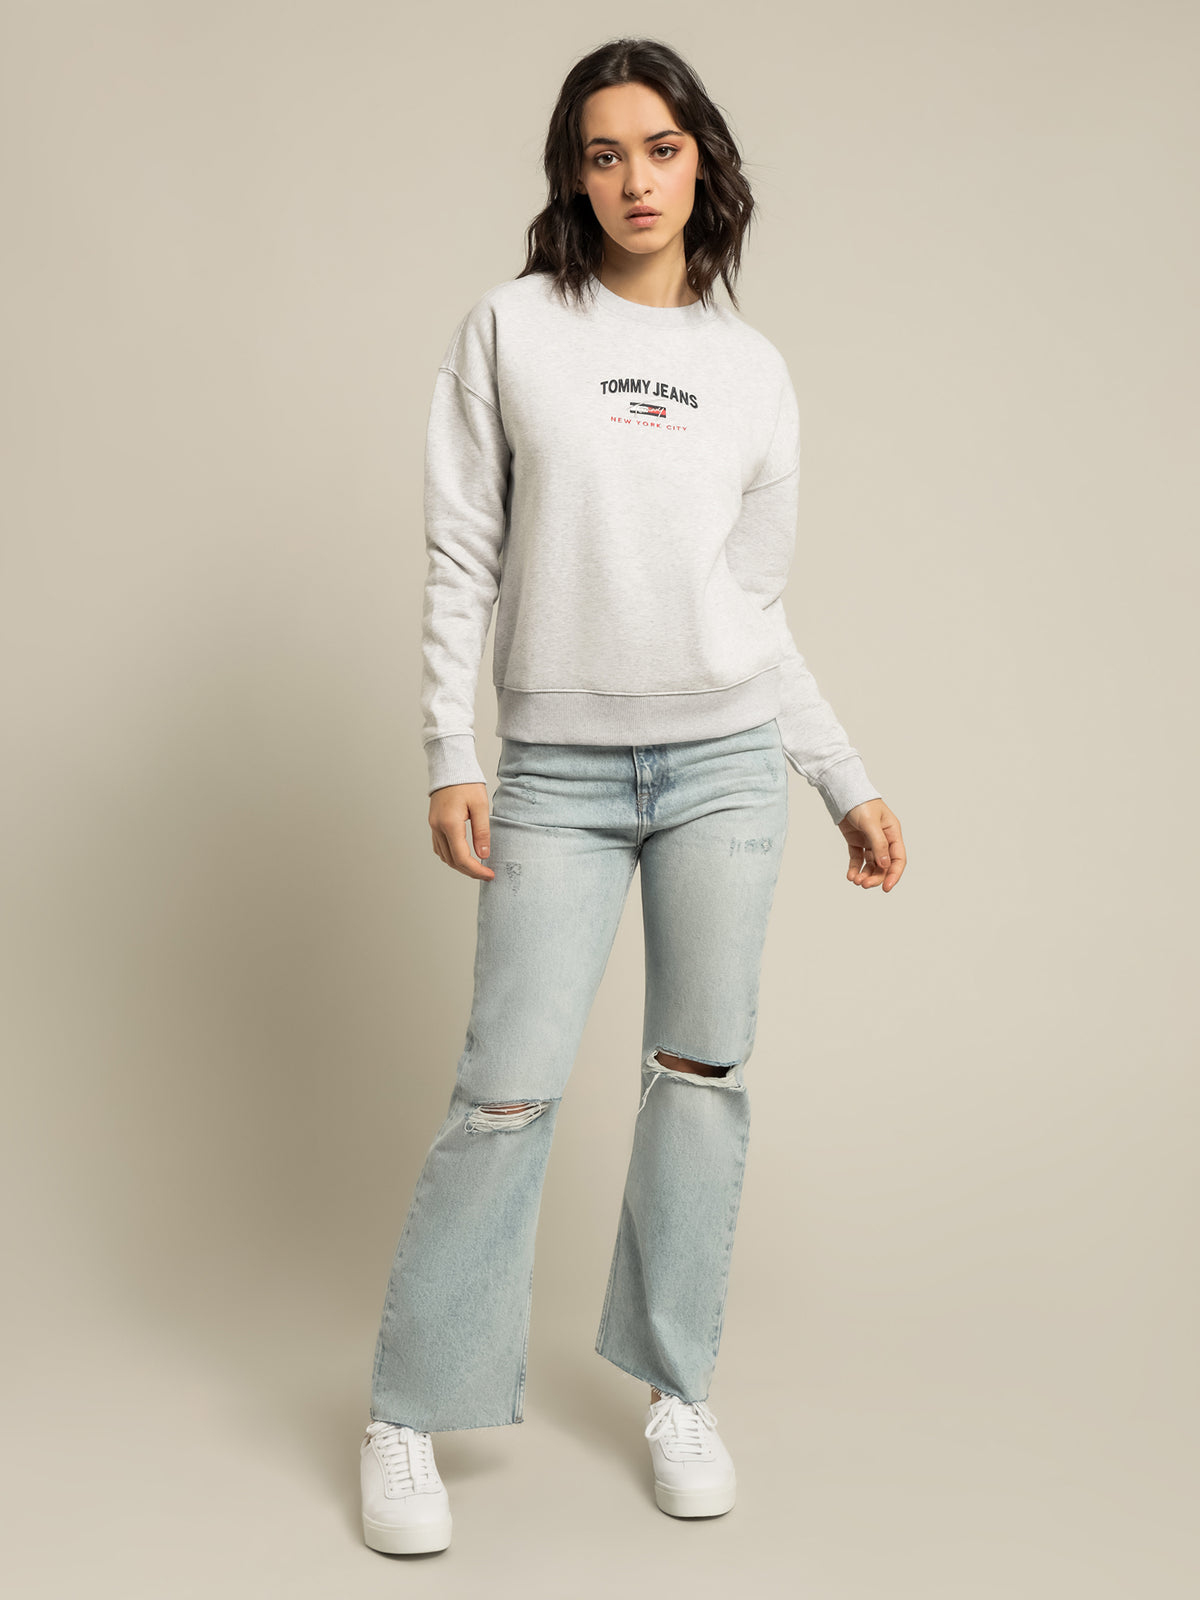 Timeless New York Logo Relaxed Fit Sweatshirt in Grey Marl